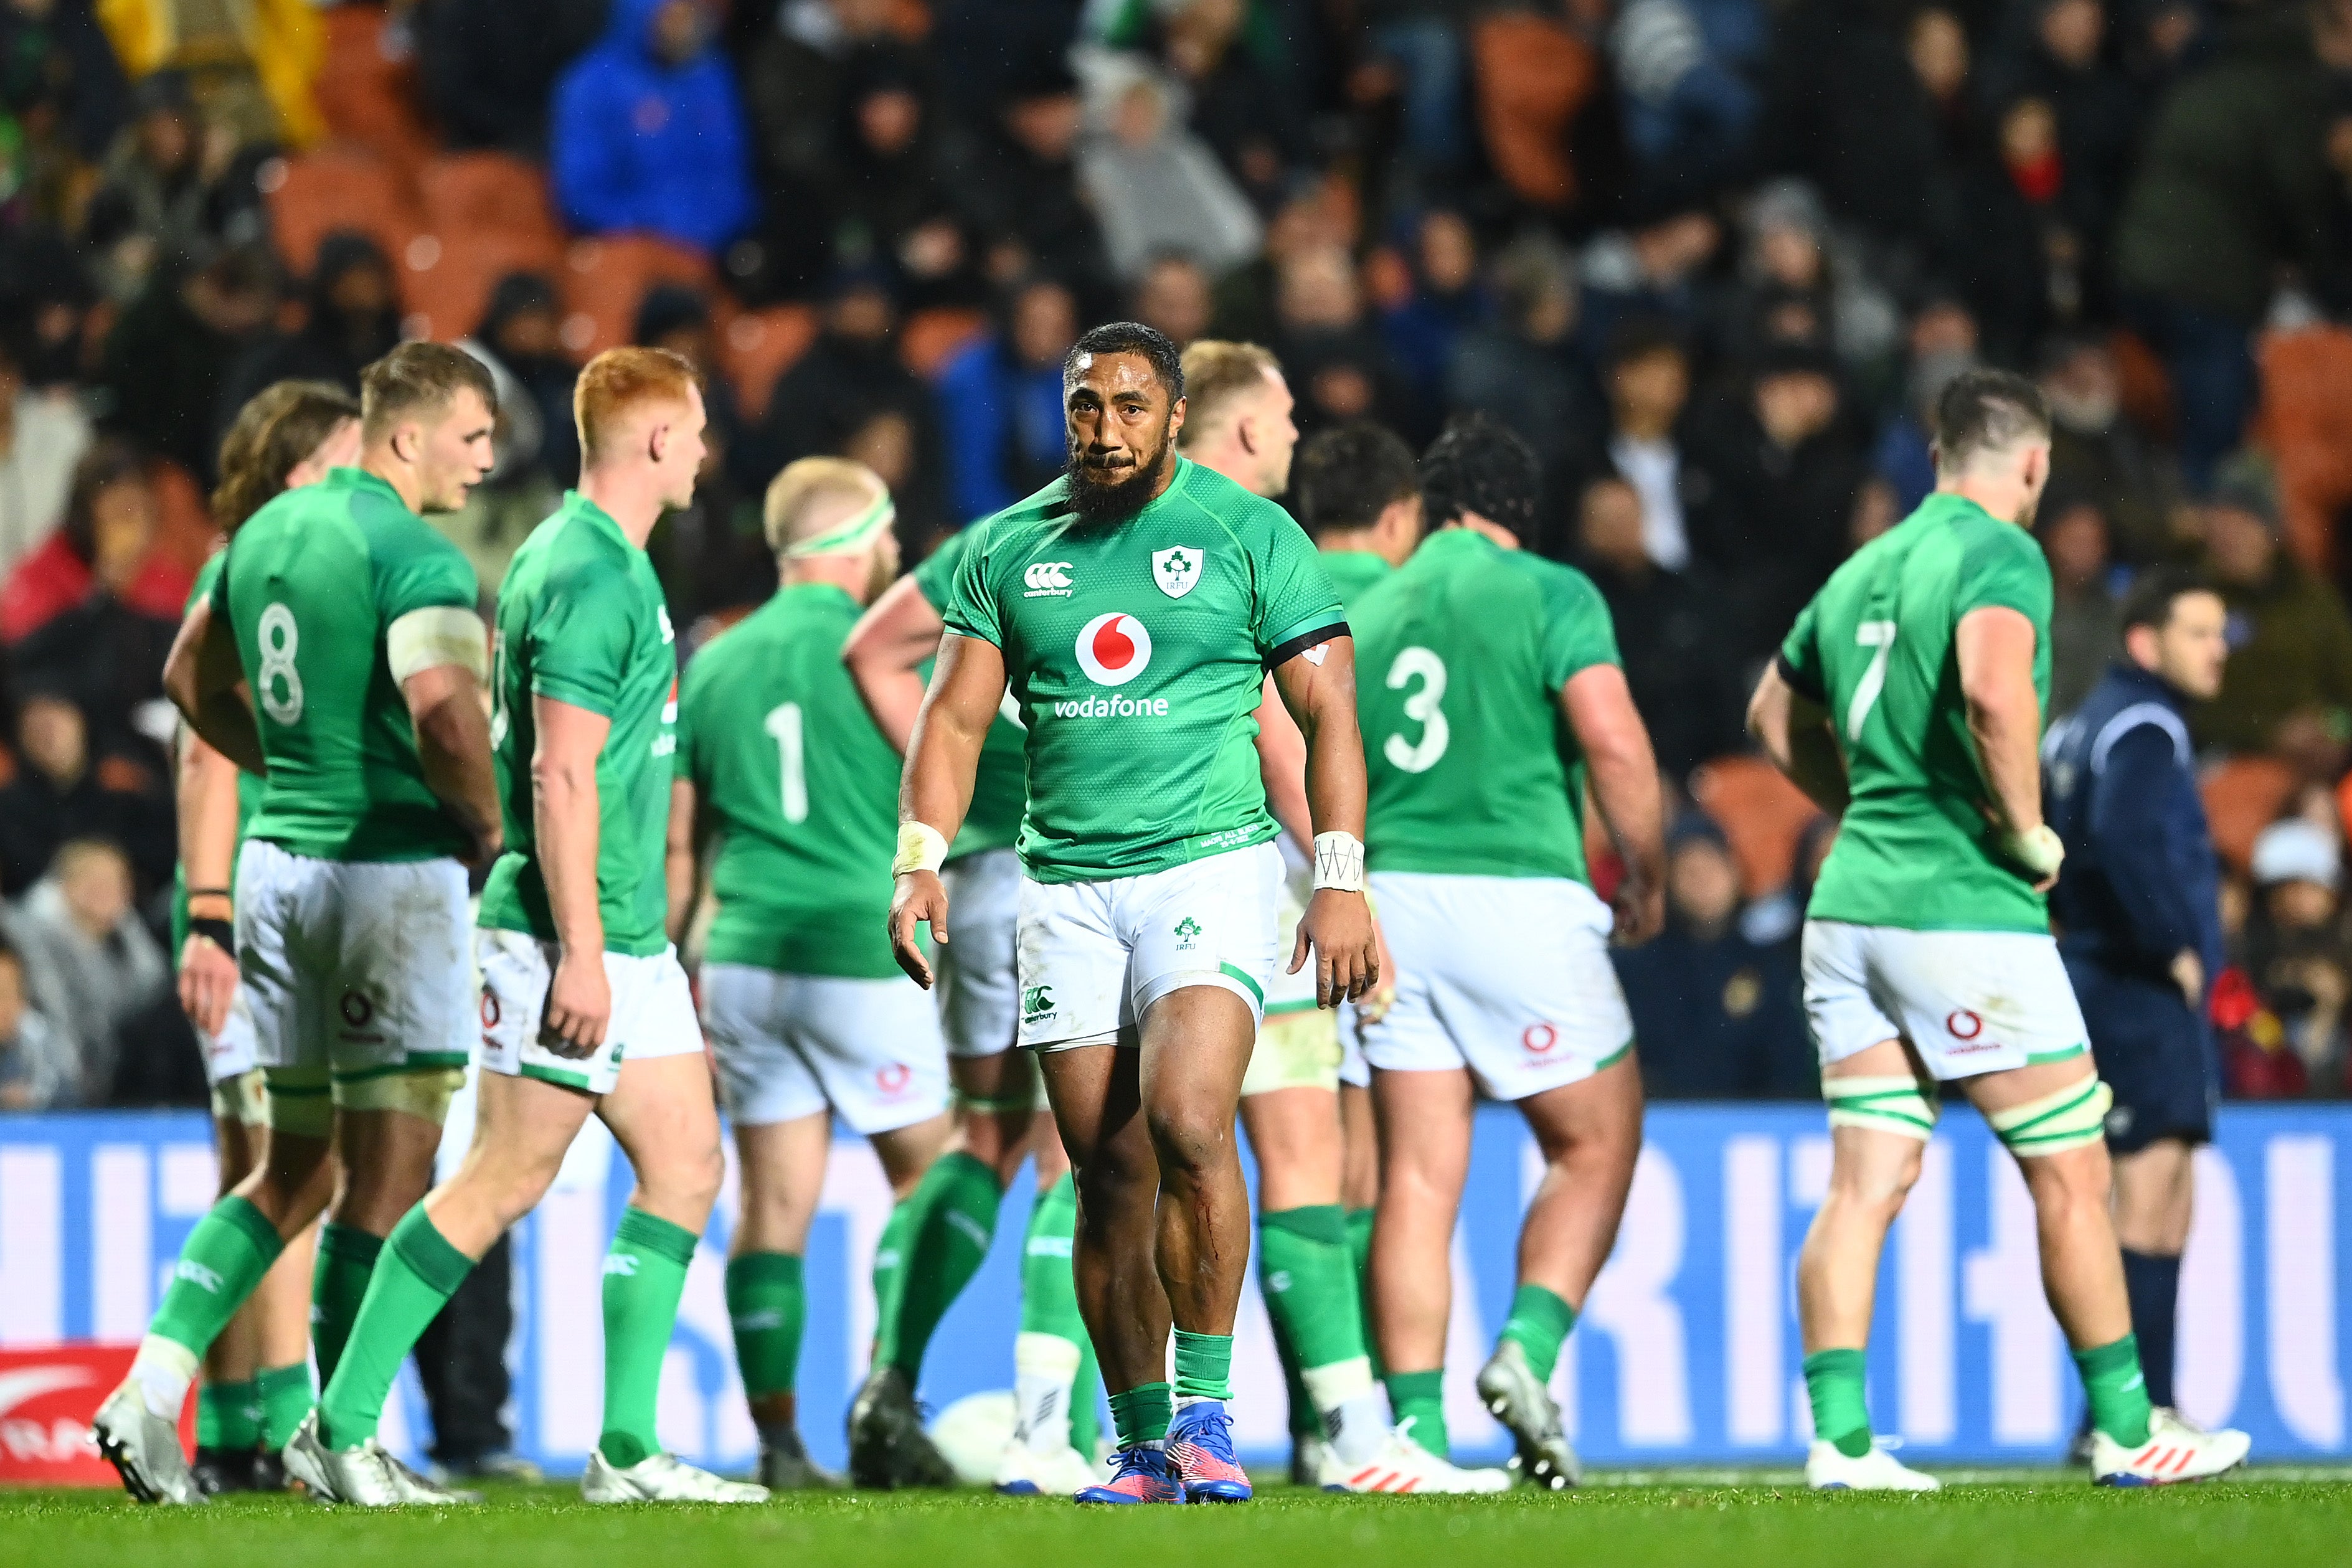 Andy Farrell fielded five uncapped players for Ireland